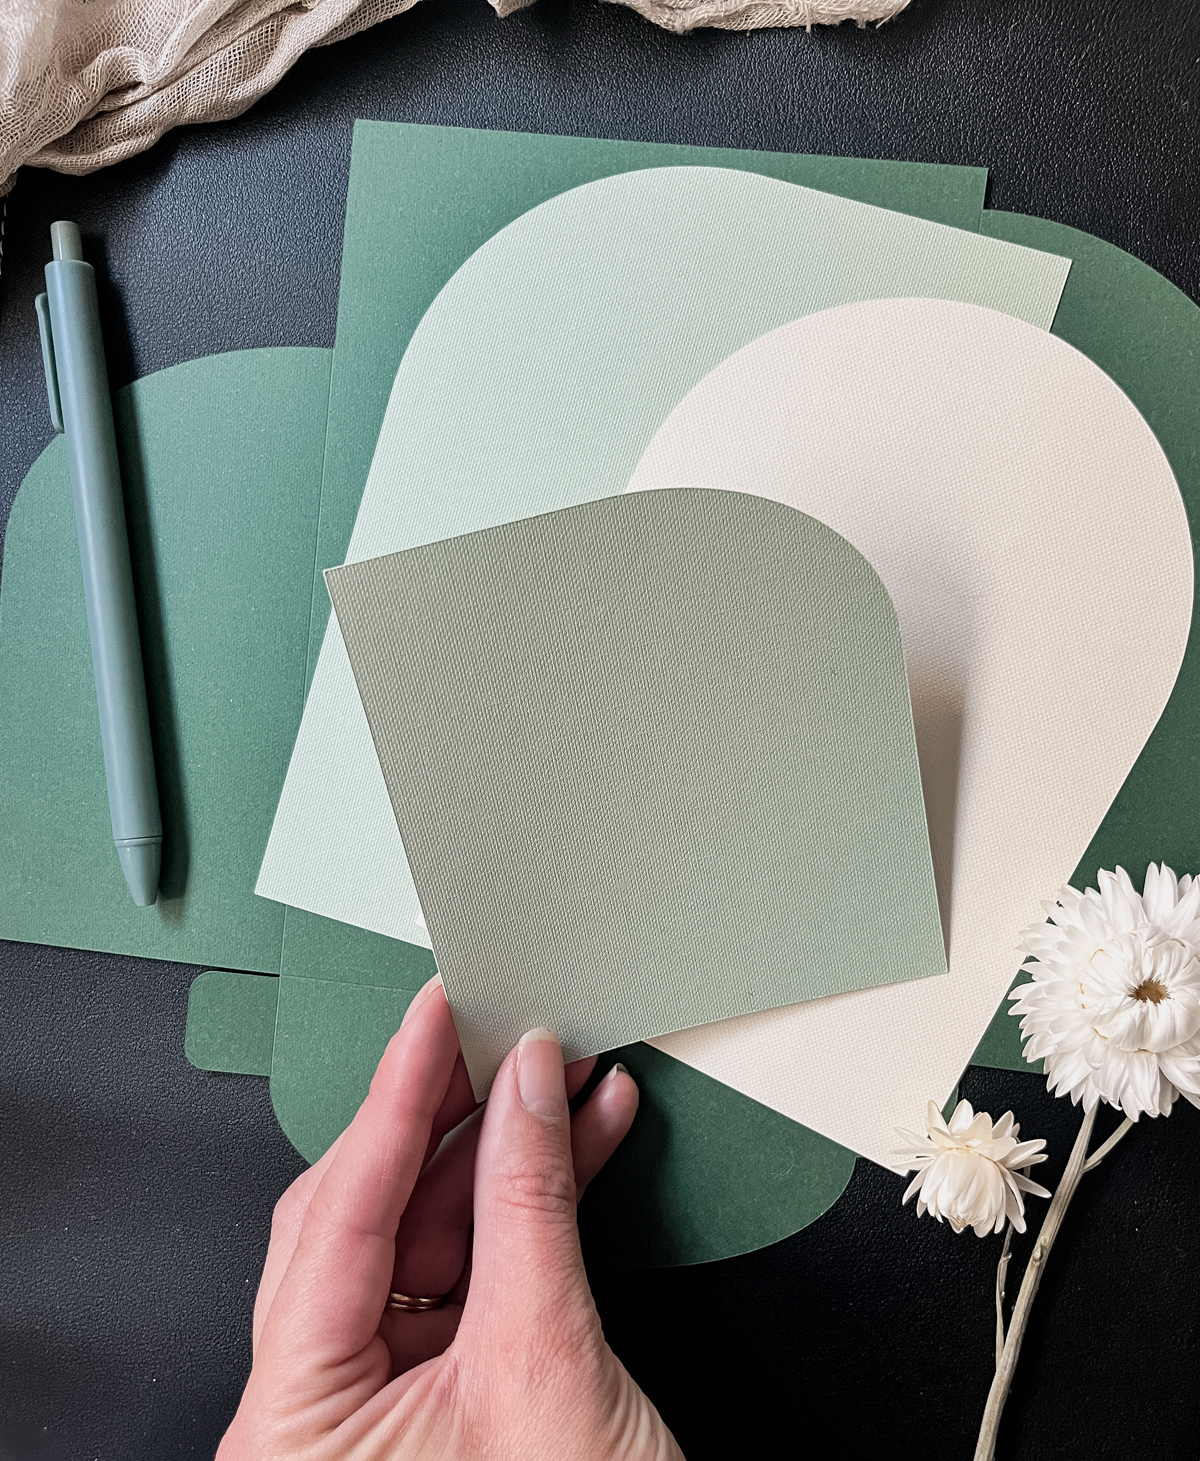 Download the free SVG template to make your own trifold pocket invitations using your Cricut. Invitation shown in pieces before assembly